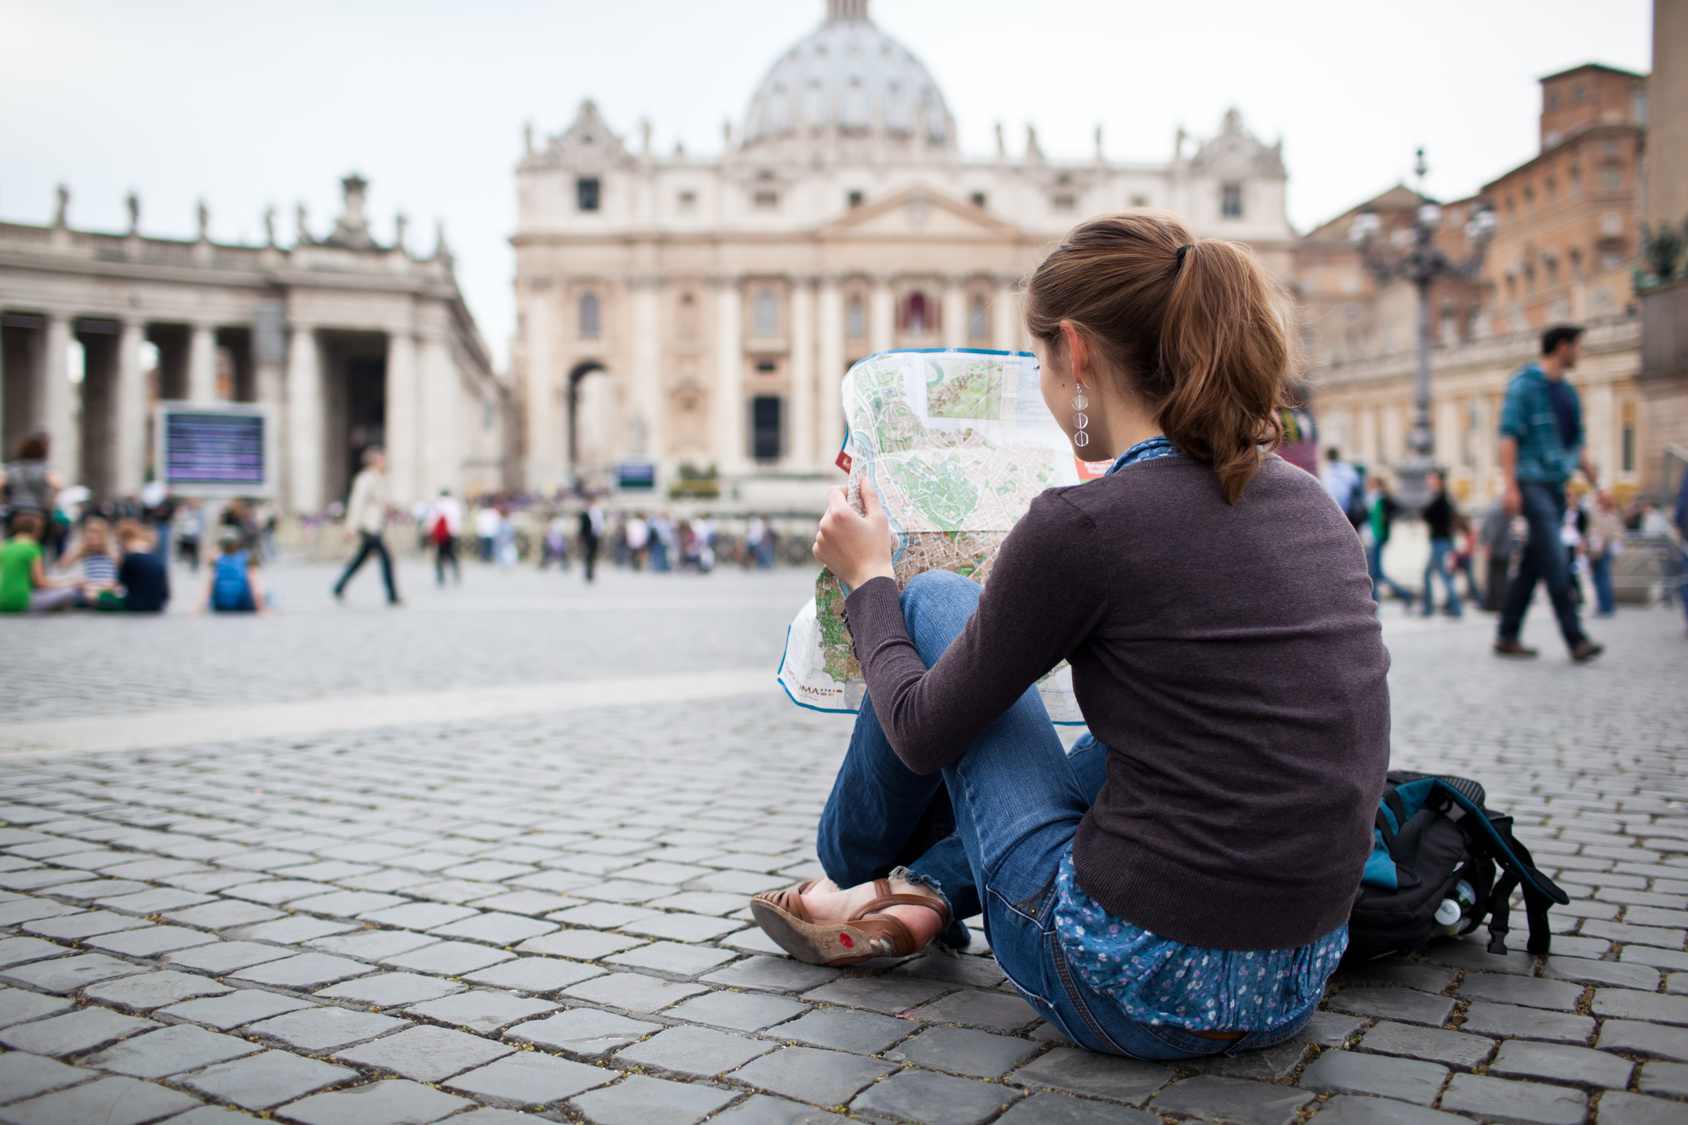 Tourists in Rome: data and numbers of 2015 and early 2016